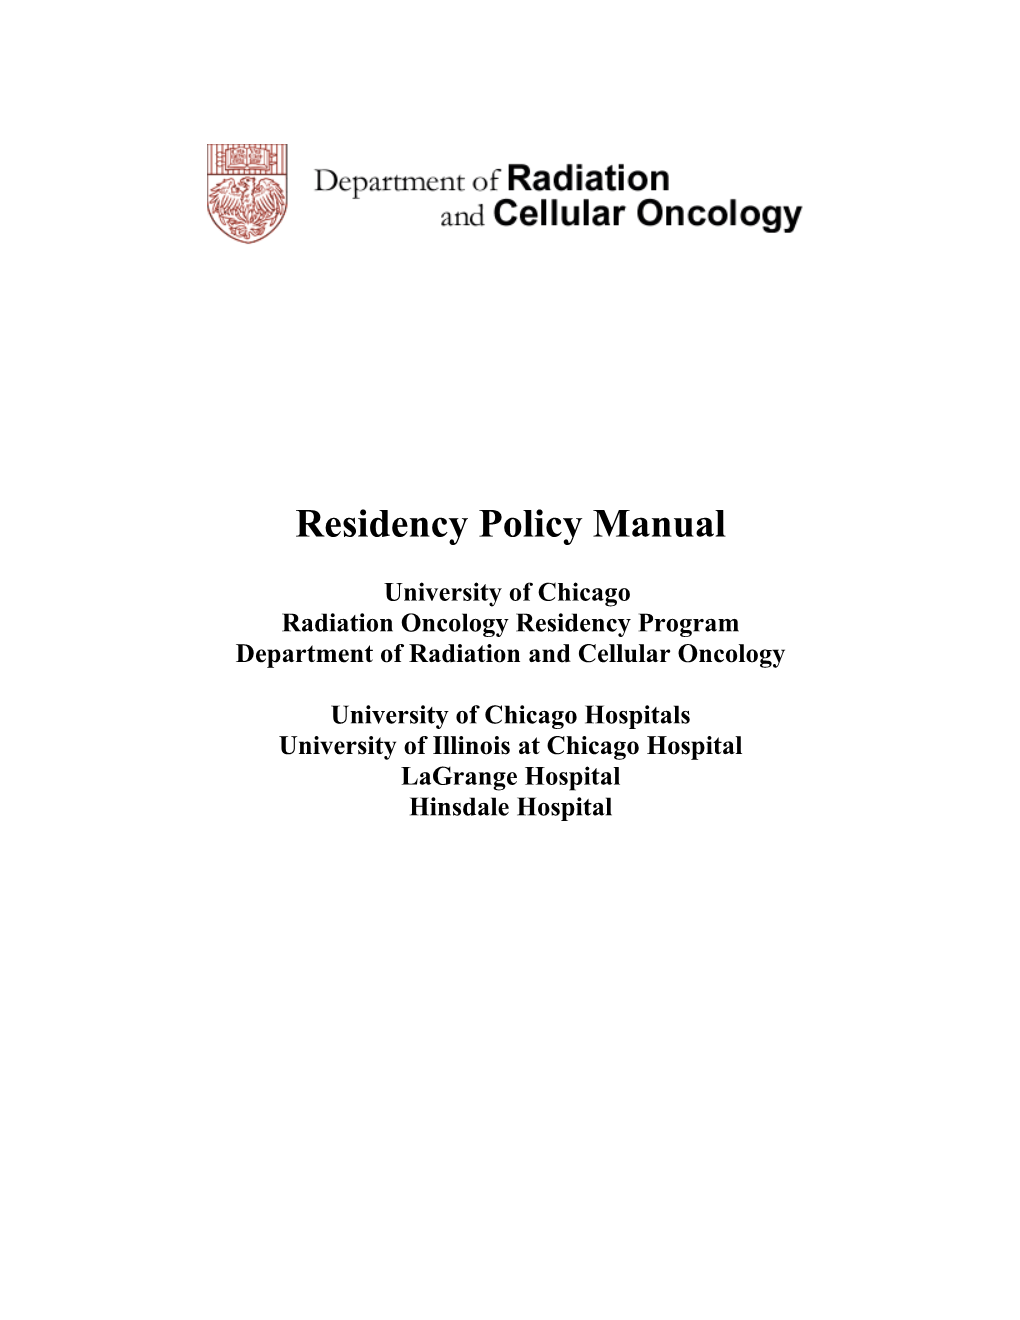 Residency Policy Manual